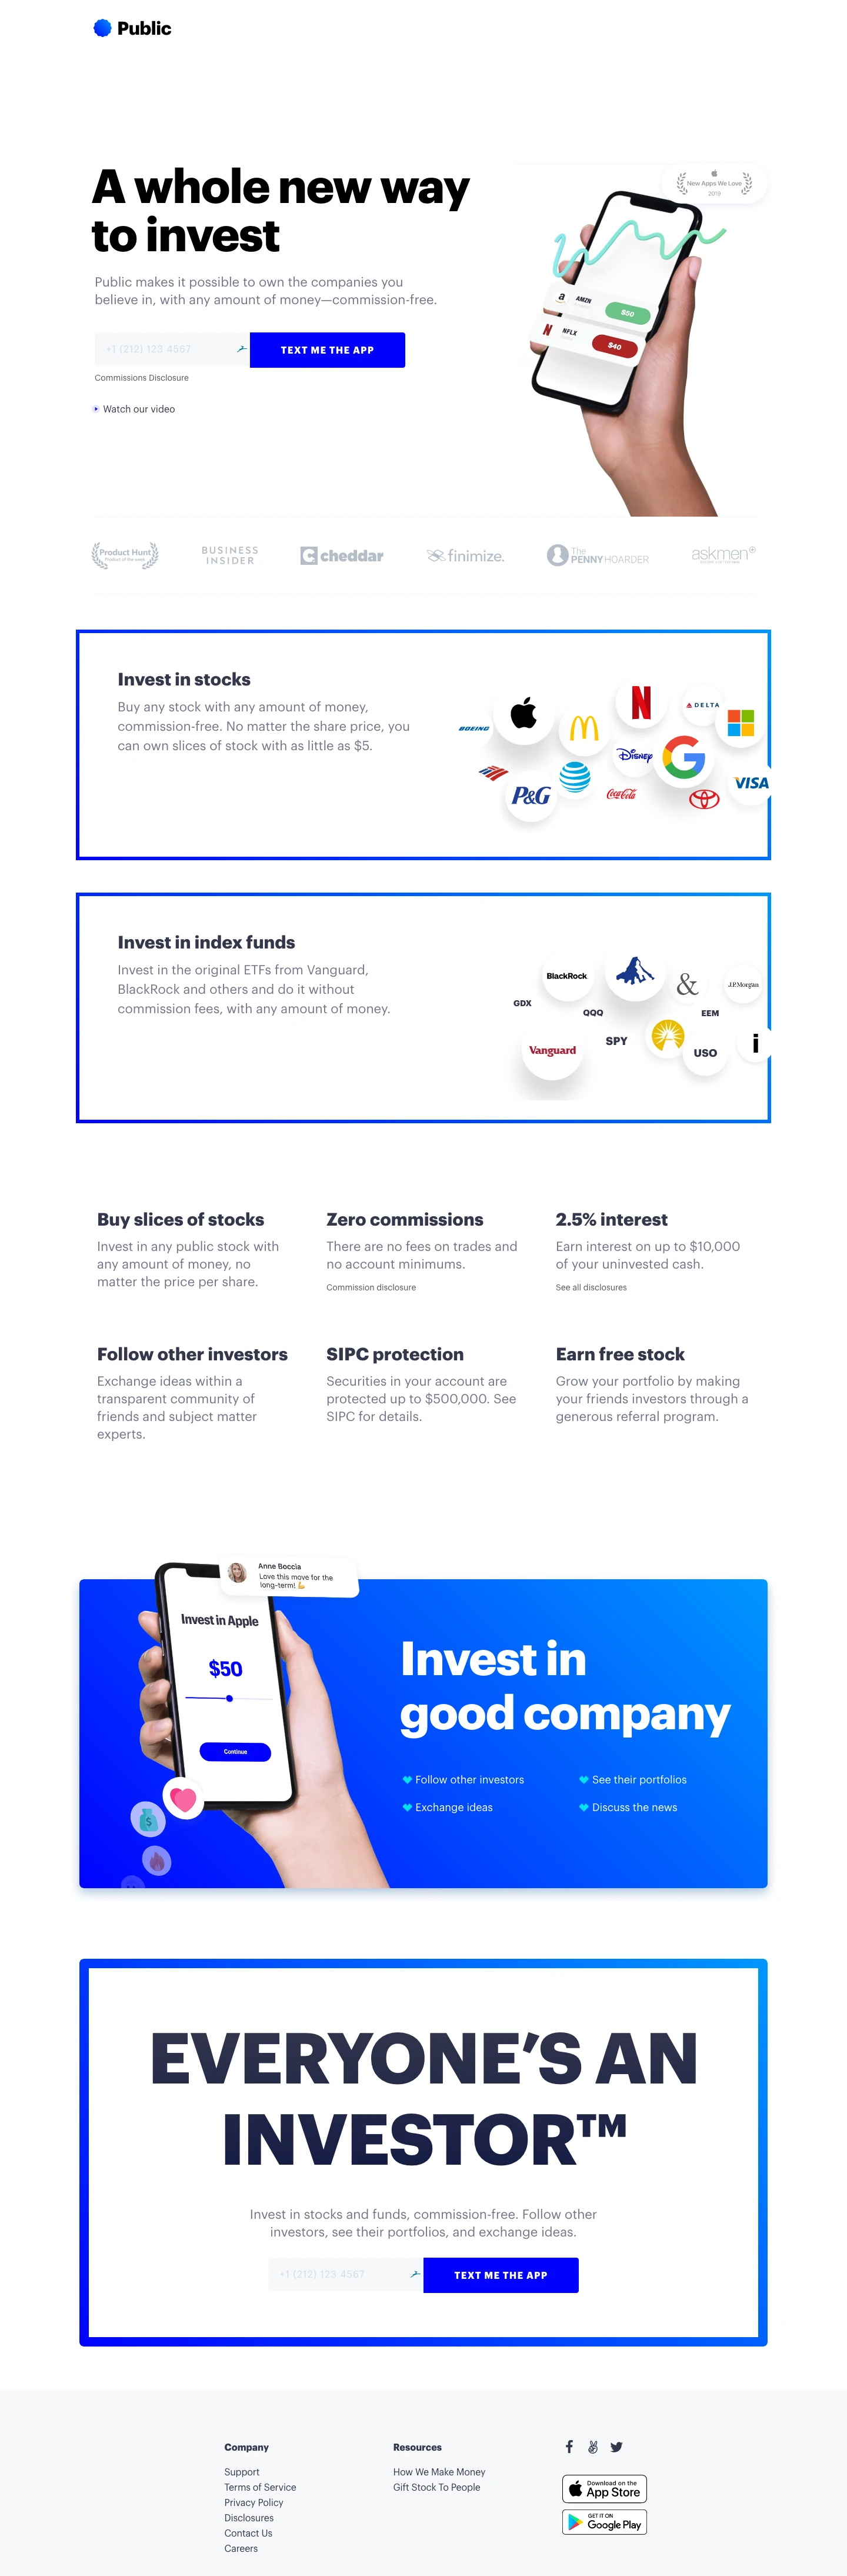 Public Landing Page Example: Public makes it possible to own the companies you believe in, with any amount of money—commission-free.